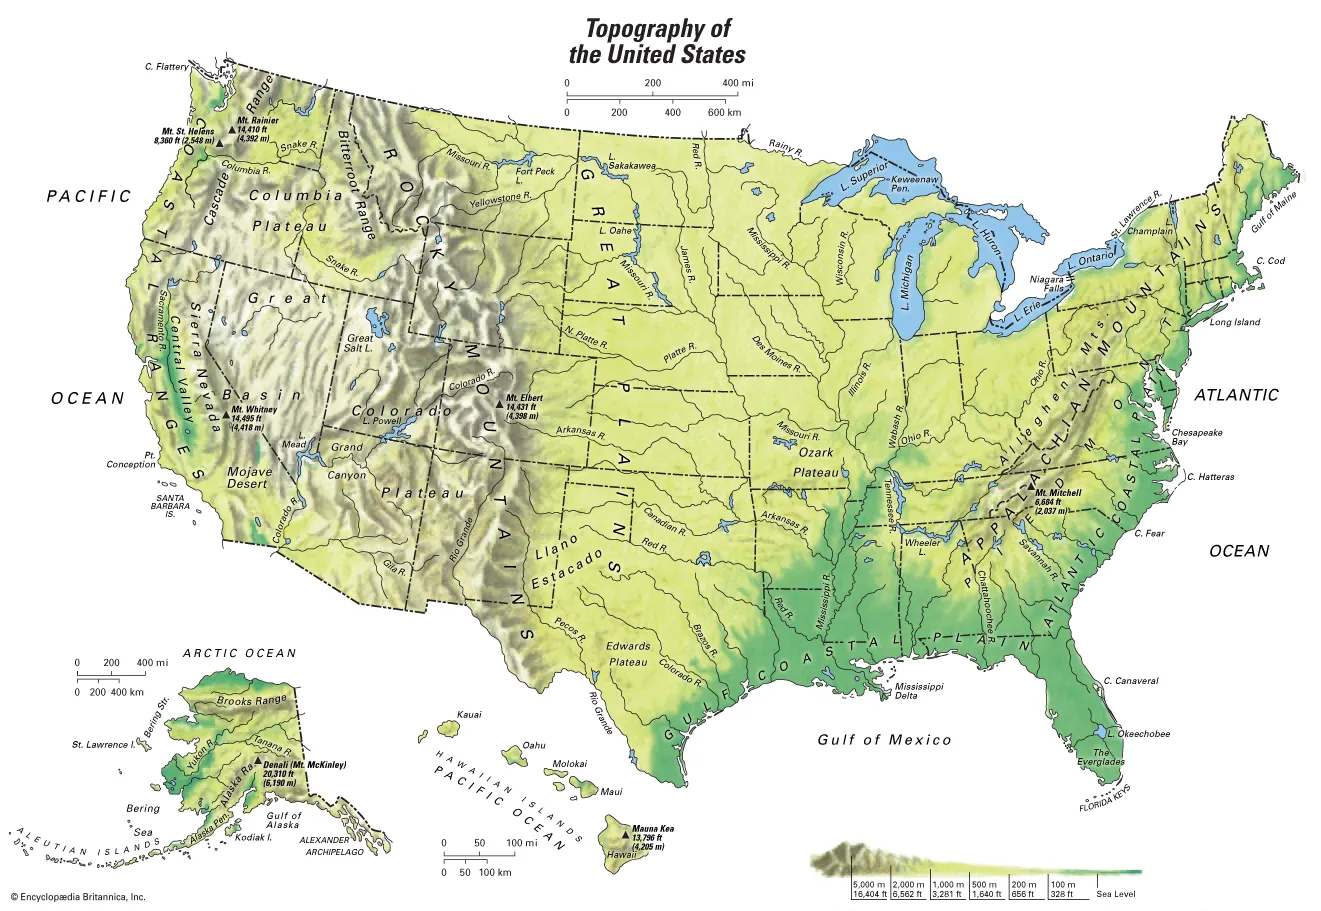 Topographical map of the United States.